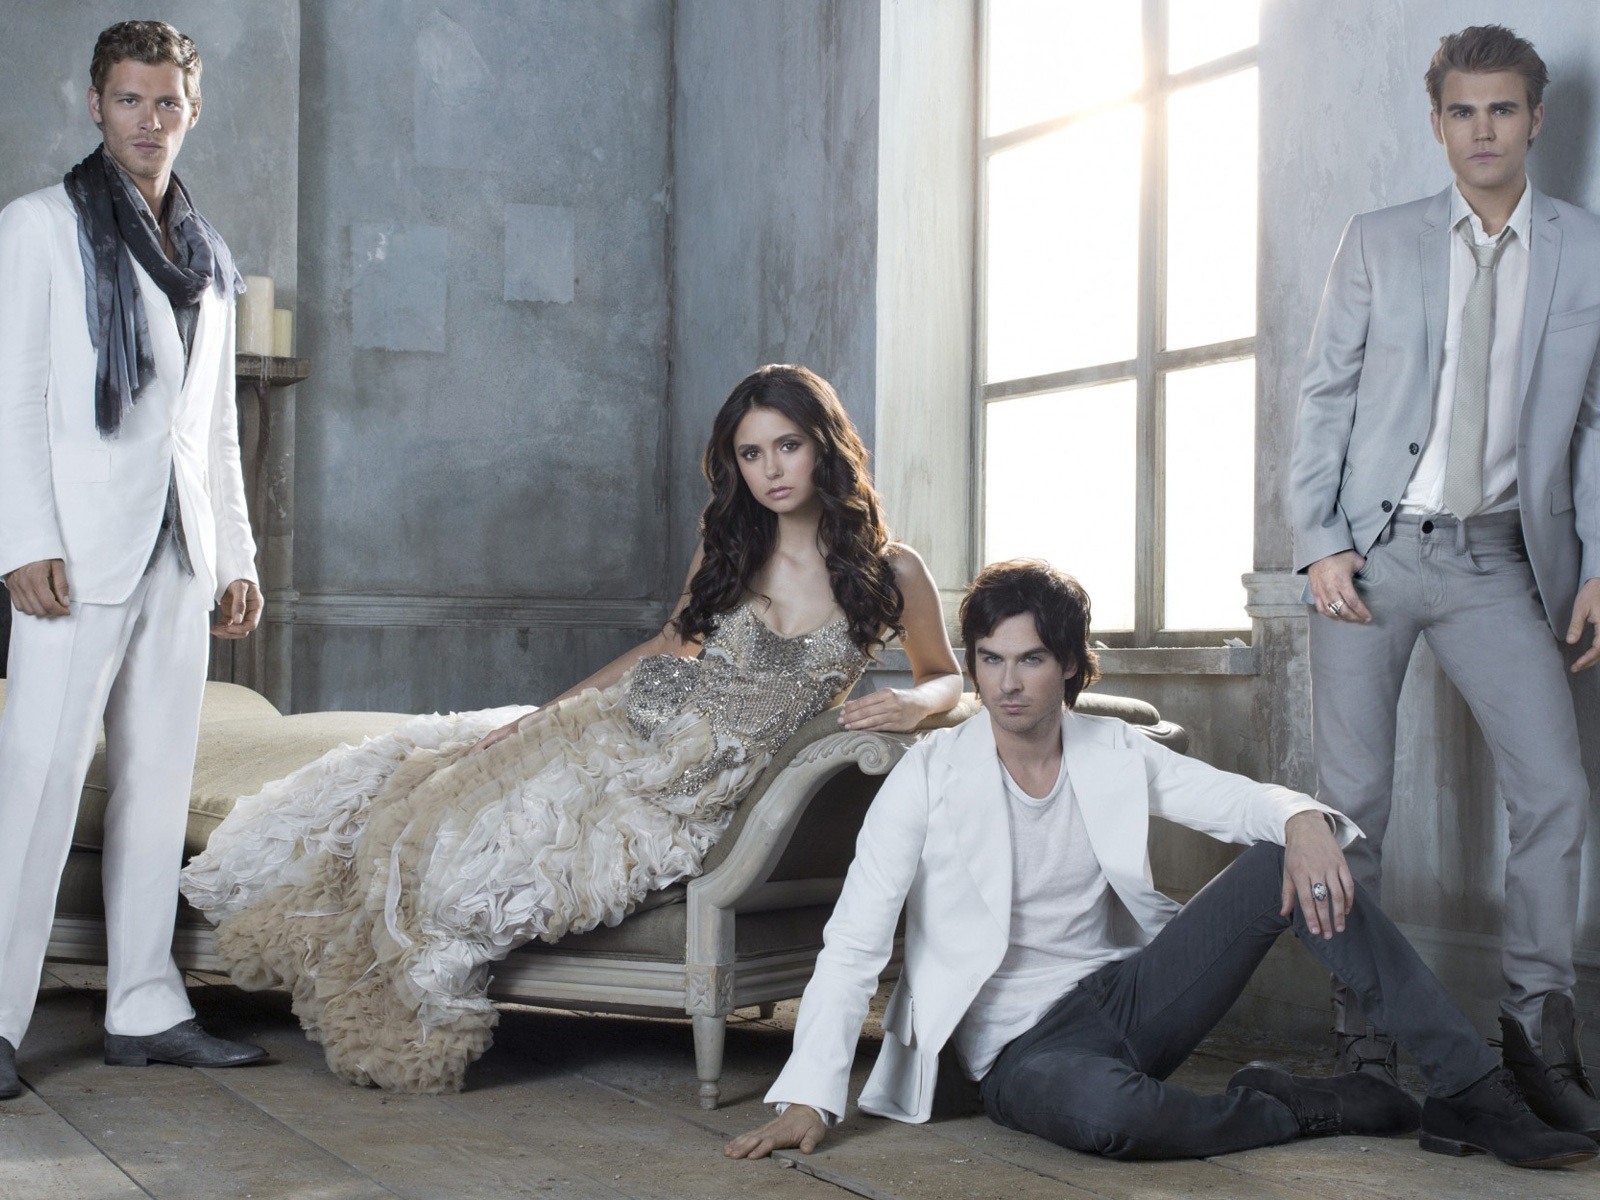 The Vampire Diaries HD Wallpapers #8 - 1600x1200